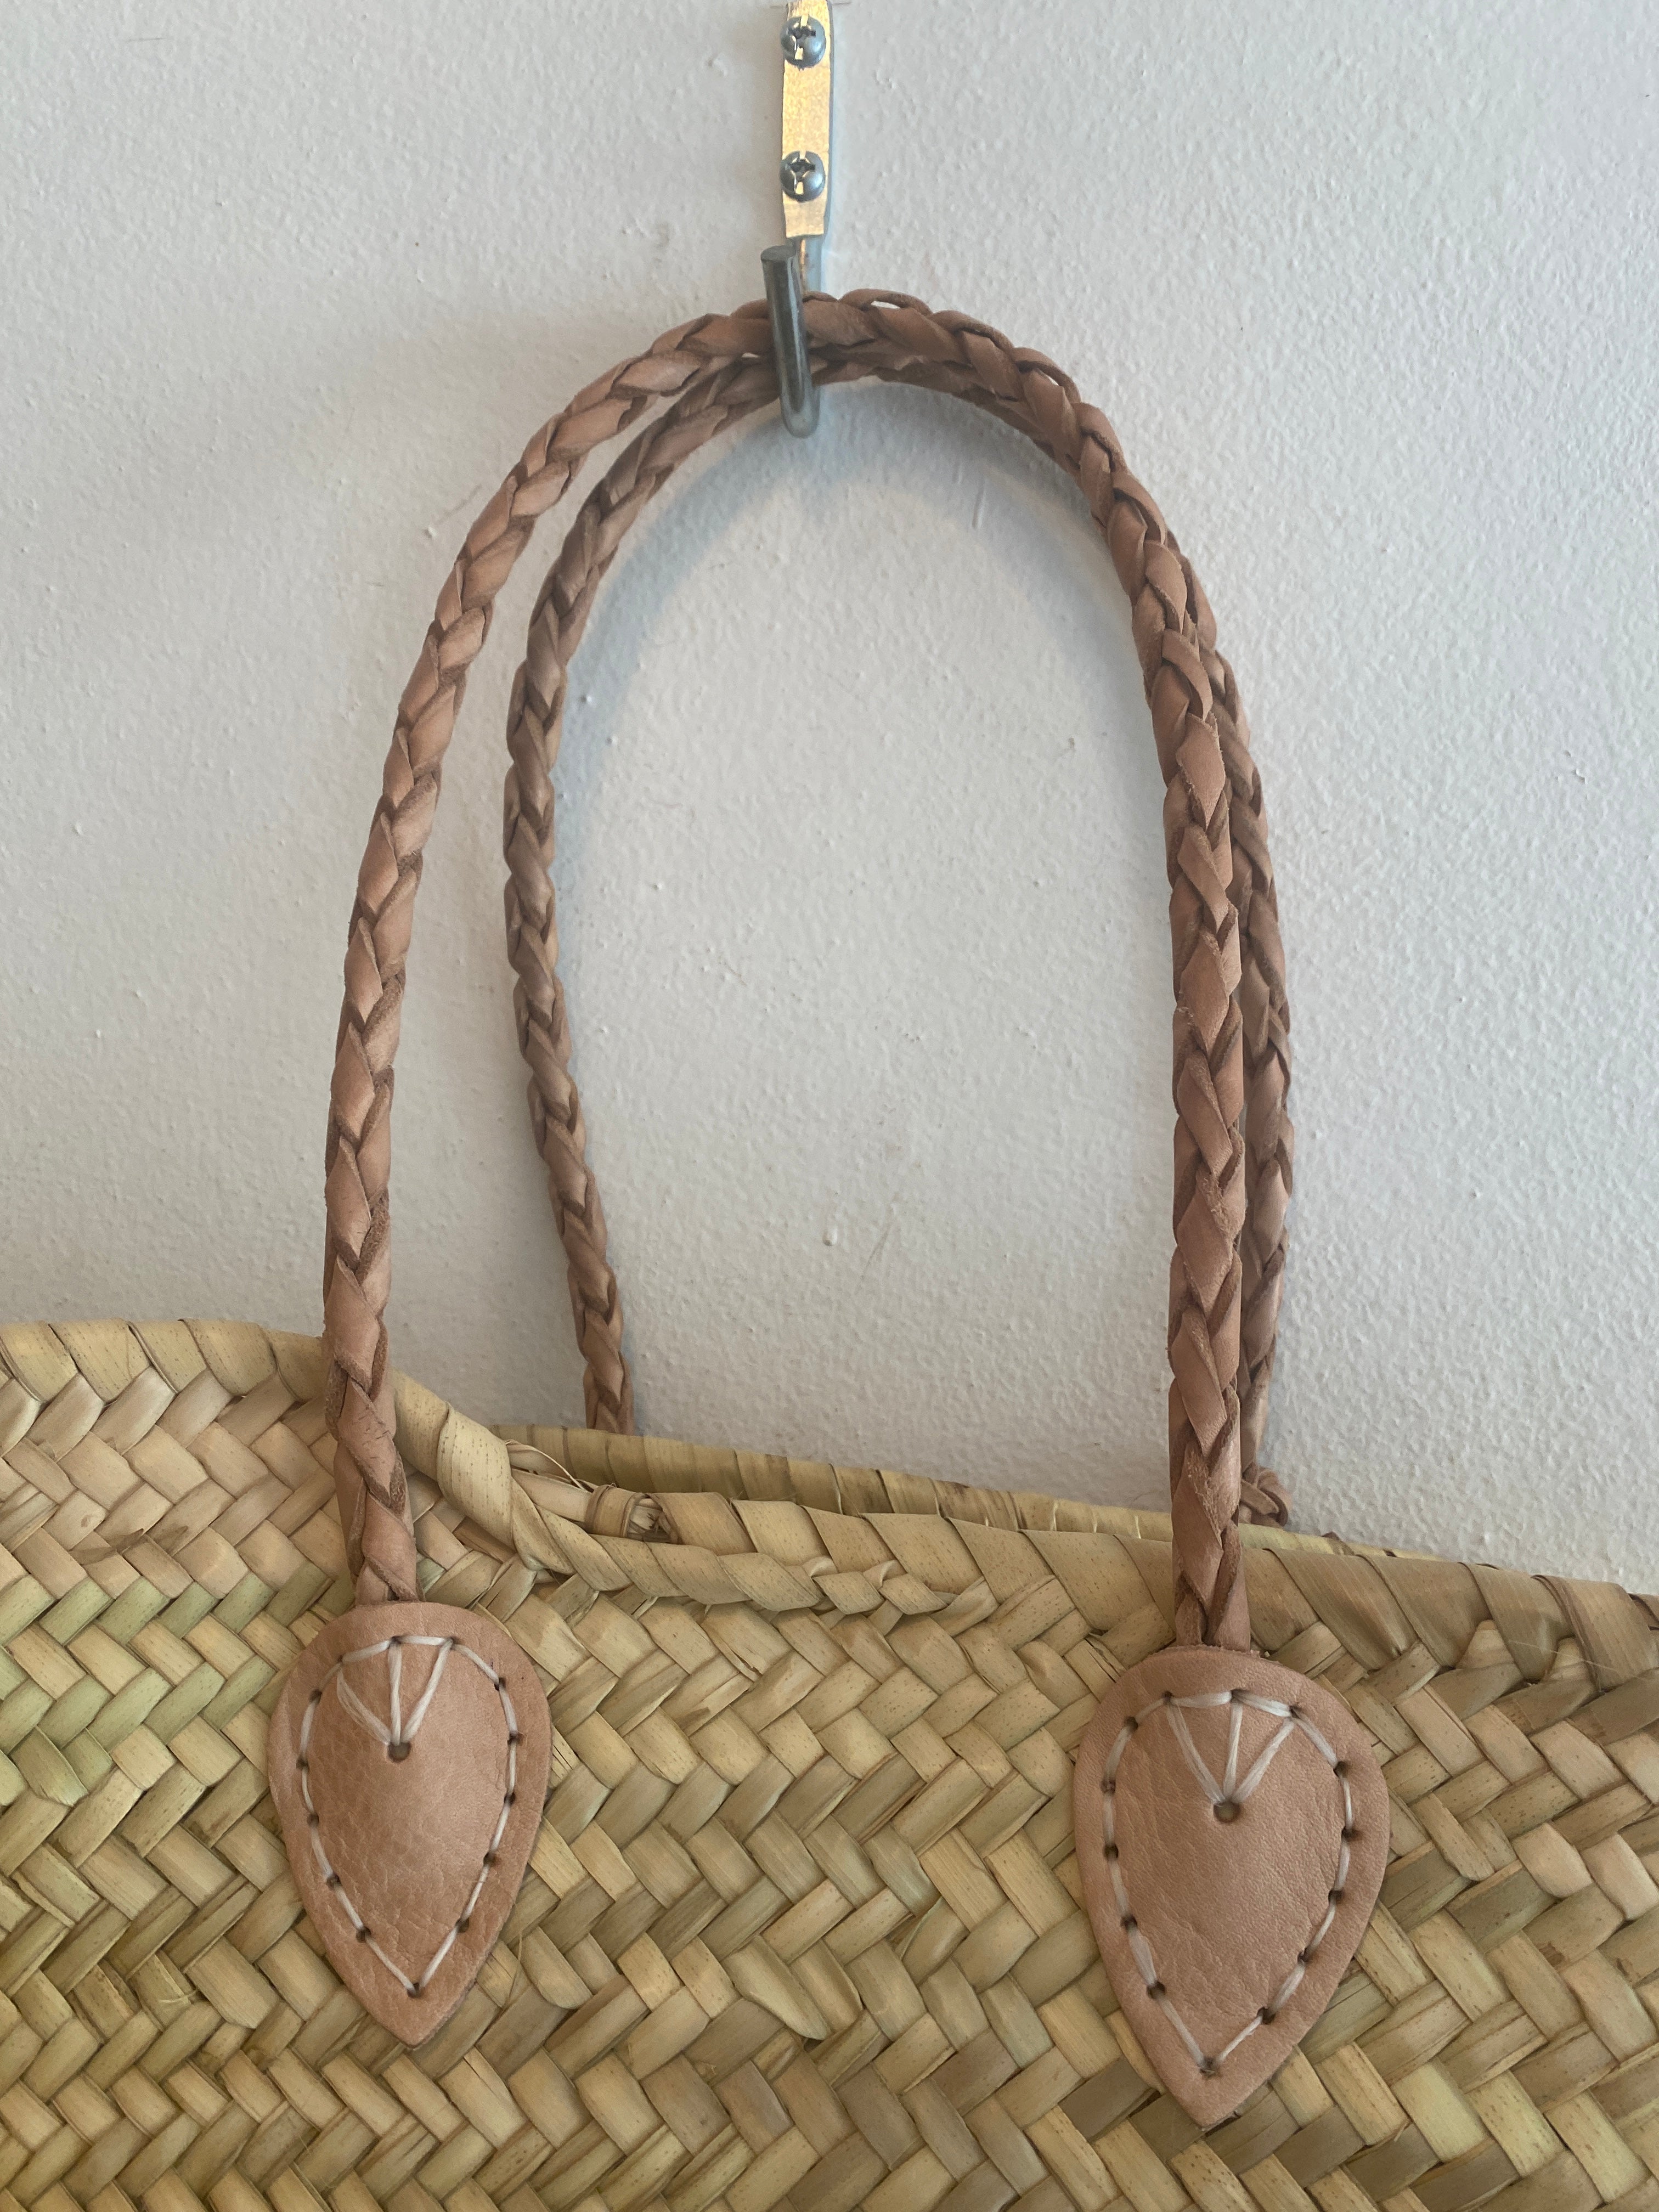 perfect size beach straw bag with braided handle